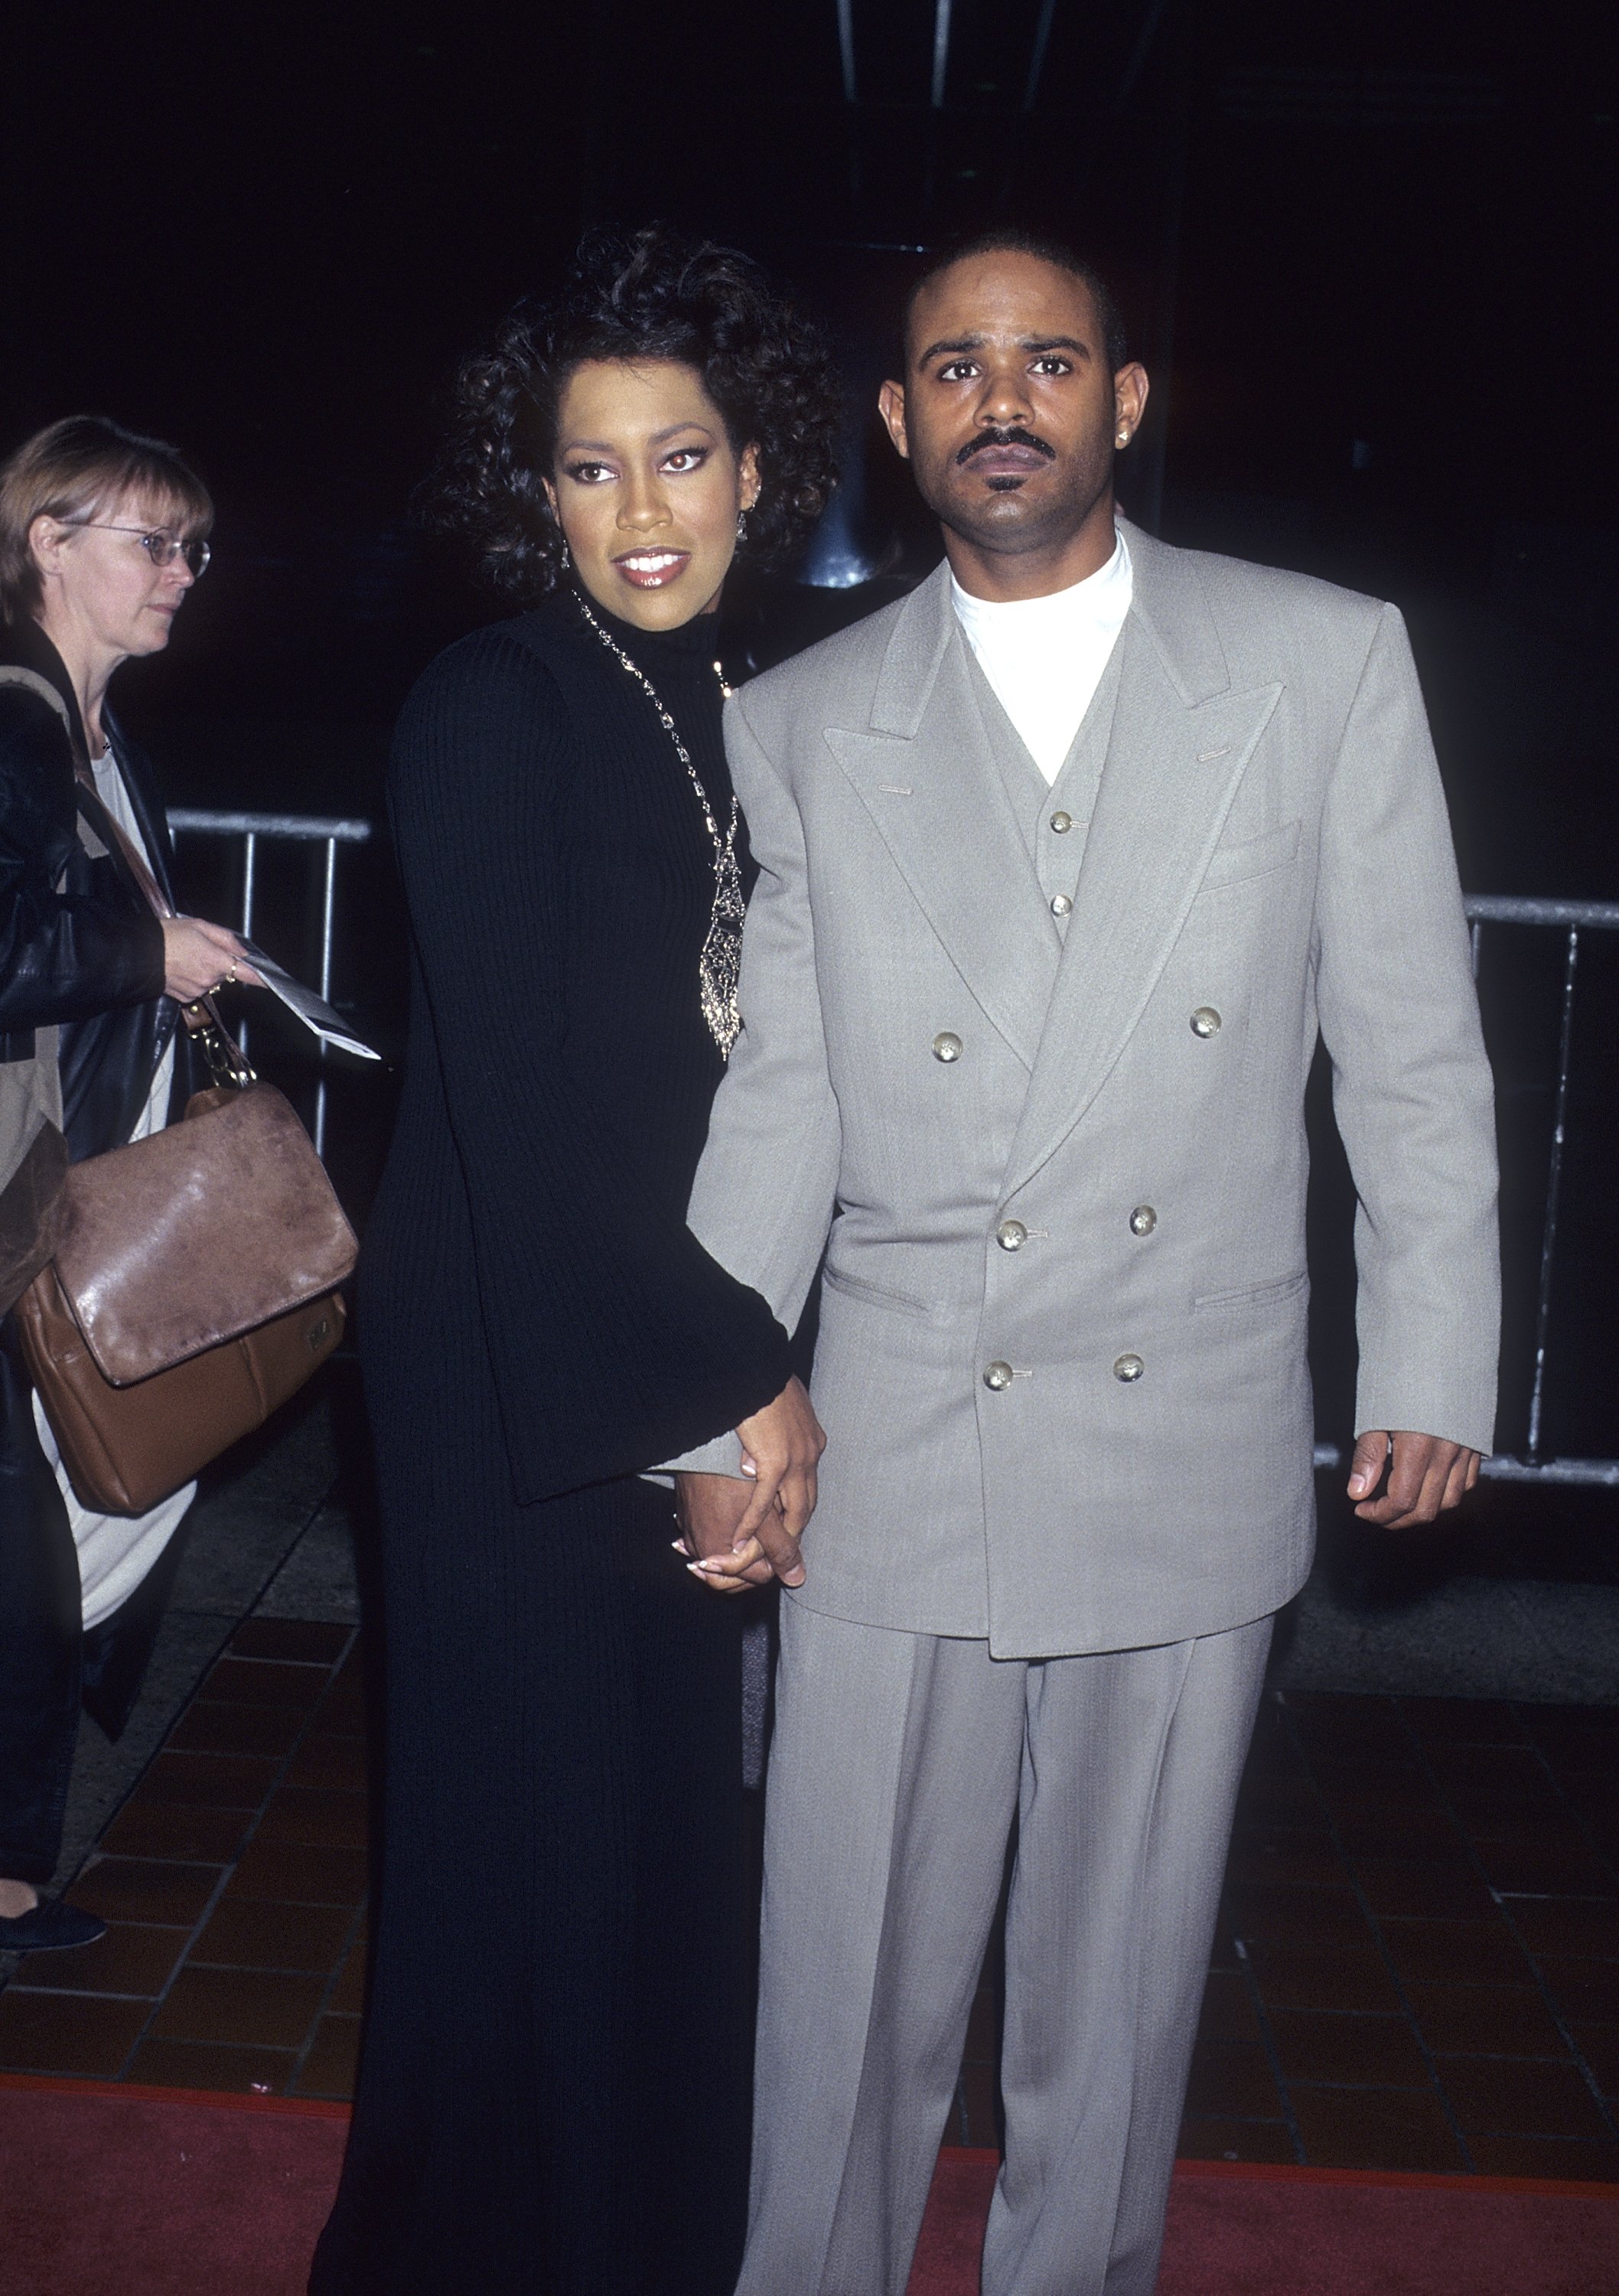 Regina King and Ian Alexander Sr. at the premiere of "Jerry Maguire" on December 6, 1996 | Source: Getty Images